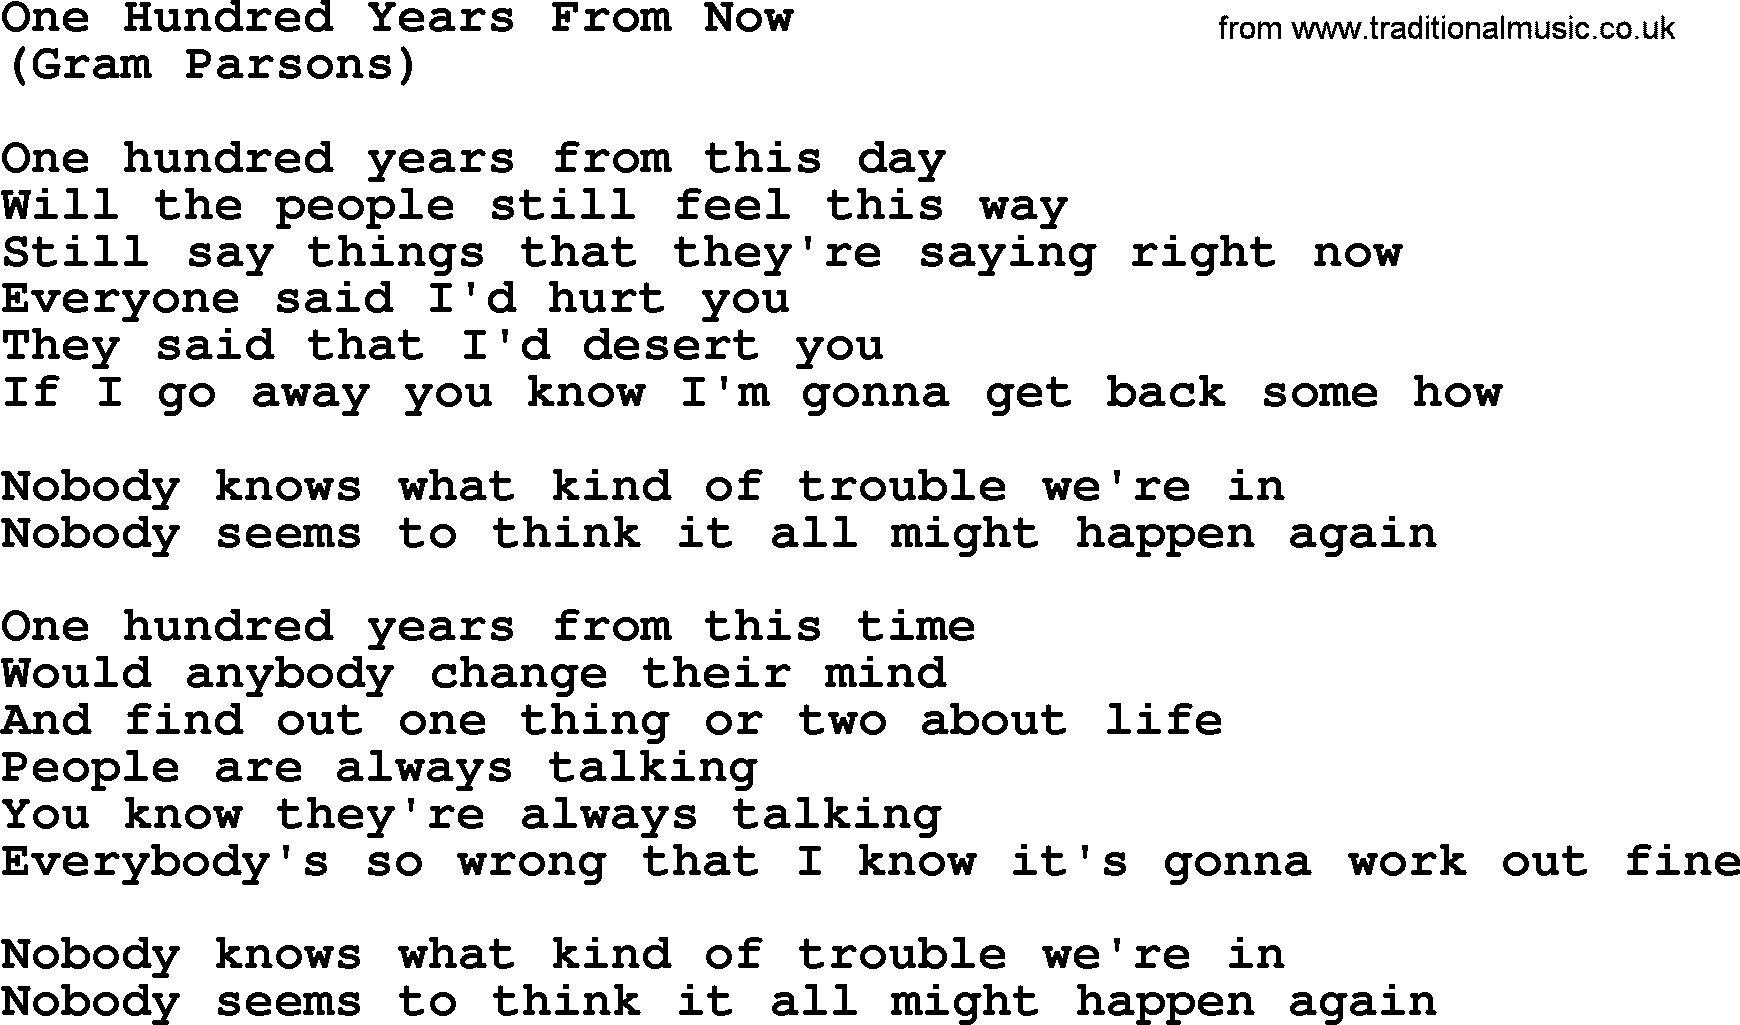 The Byrds song One Hundred Years From Now, lyrics